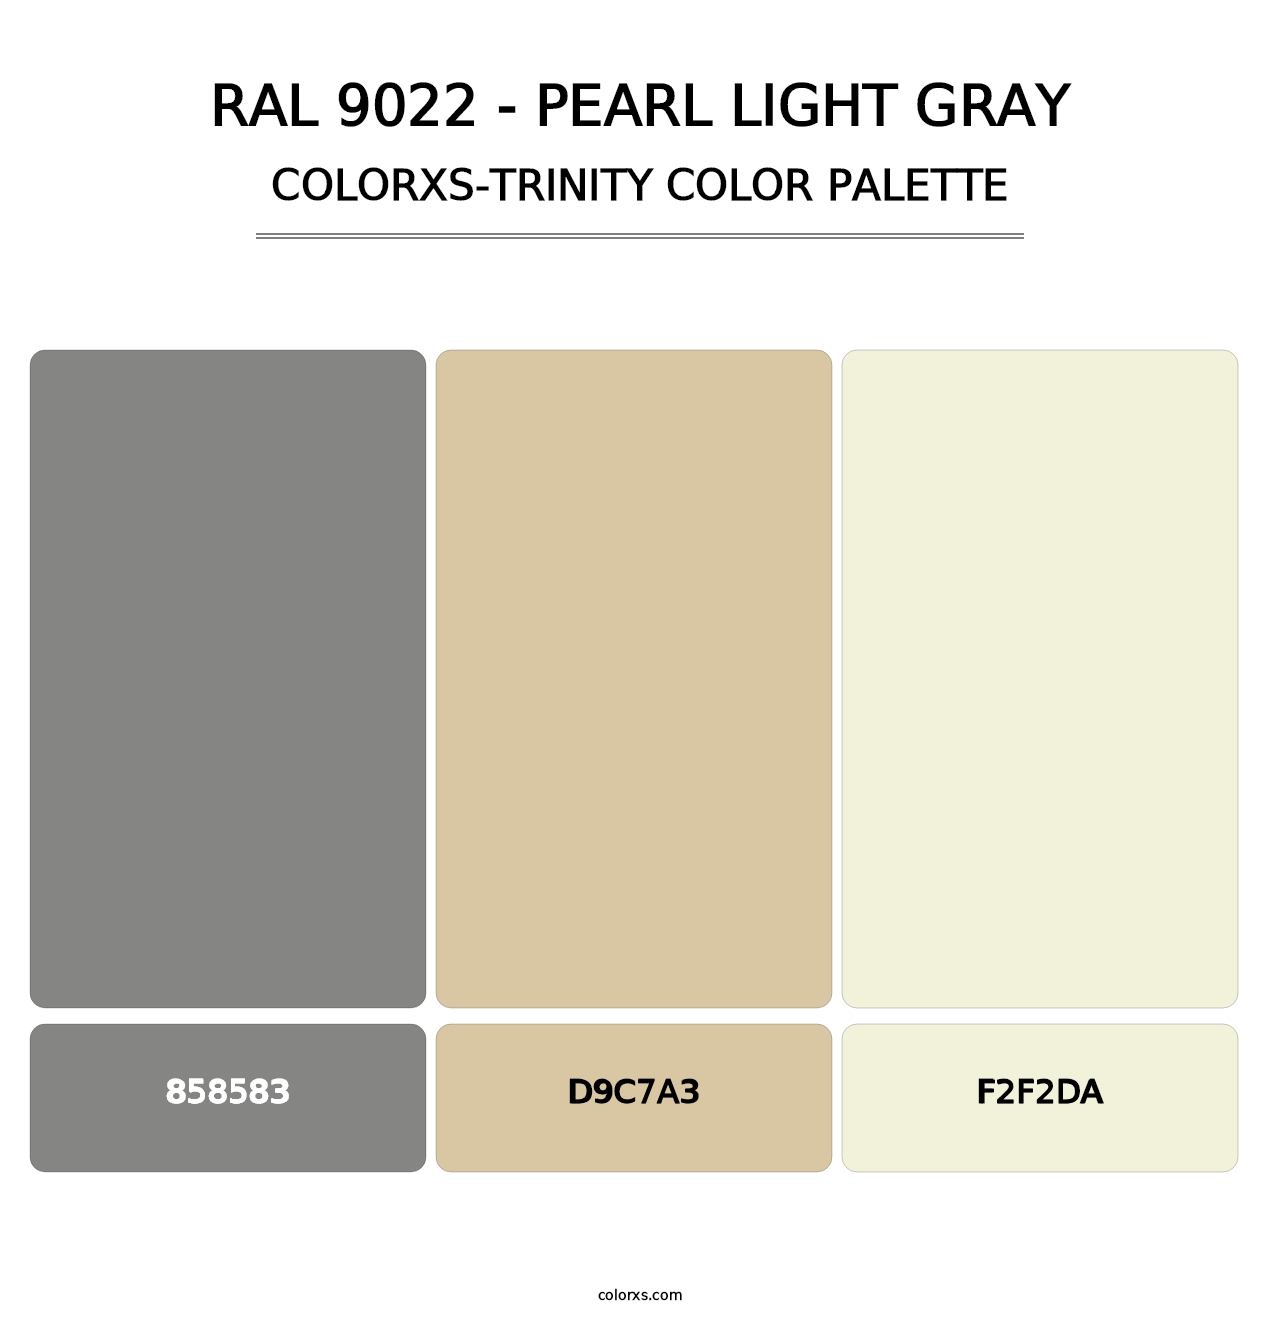 RAL 9022 - Pearl Light Gray - Colorxs Trinity Palette